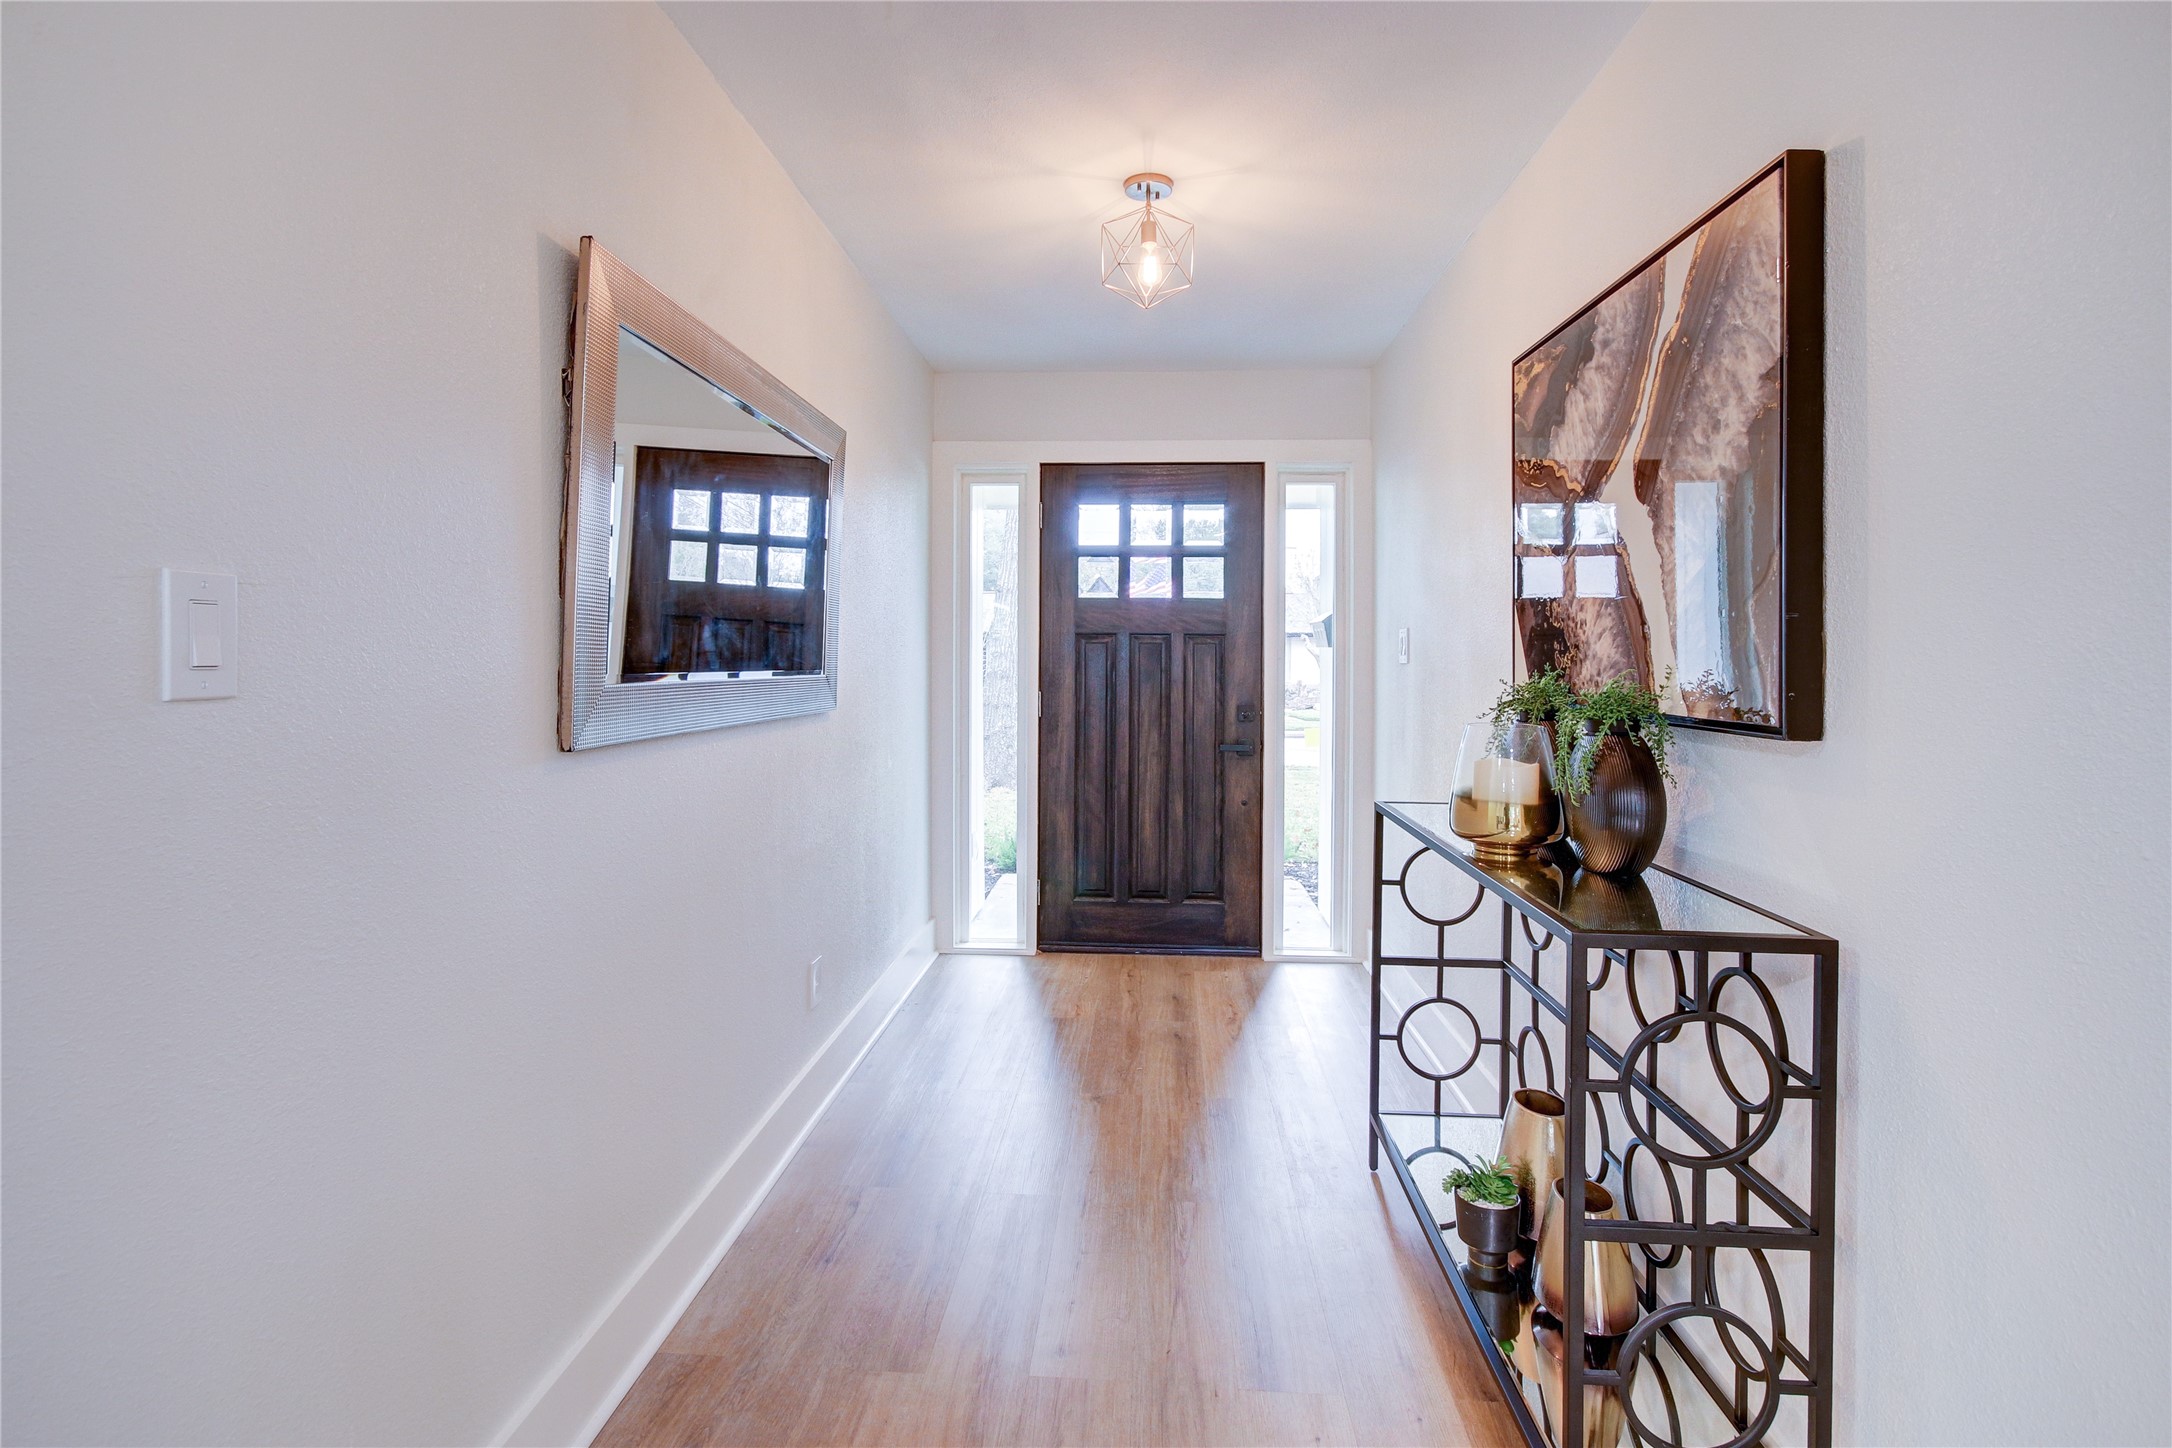 Warm and inviting entry foyer!